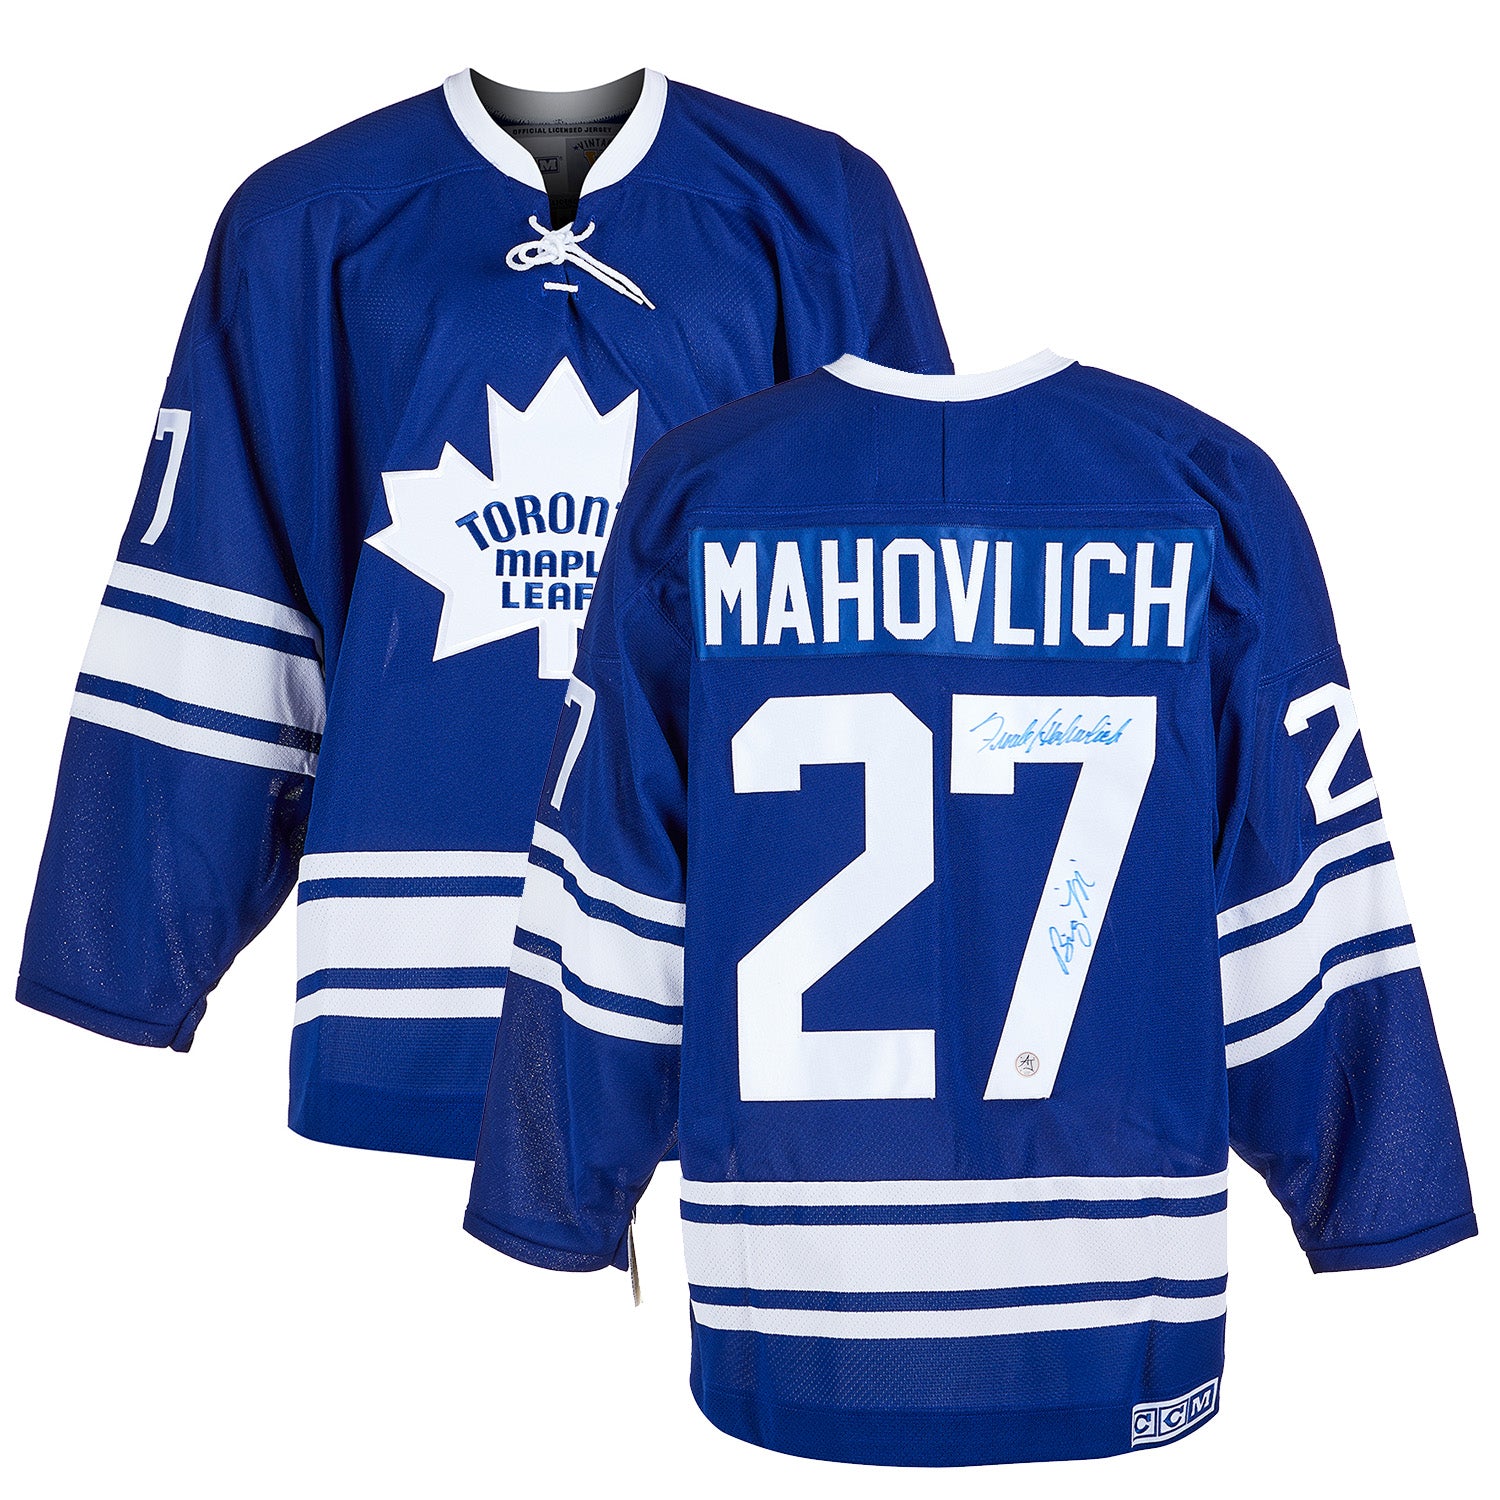 Frank Mahovlich Signed Toronto Maple Leafs 1967 Stanley Cup CCM Vintage Jersey